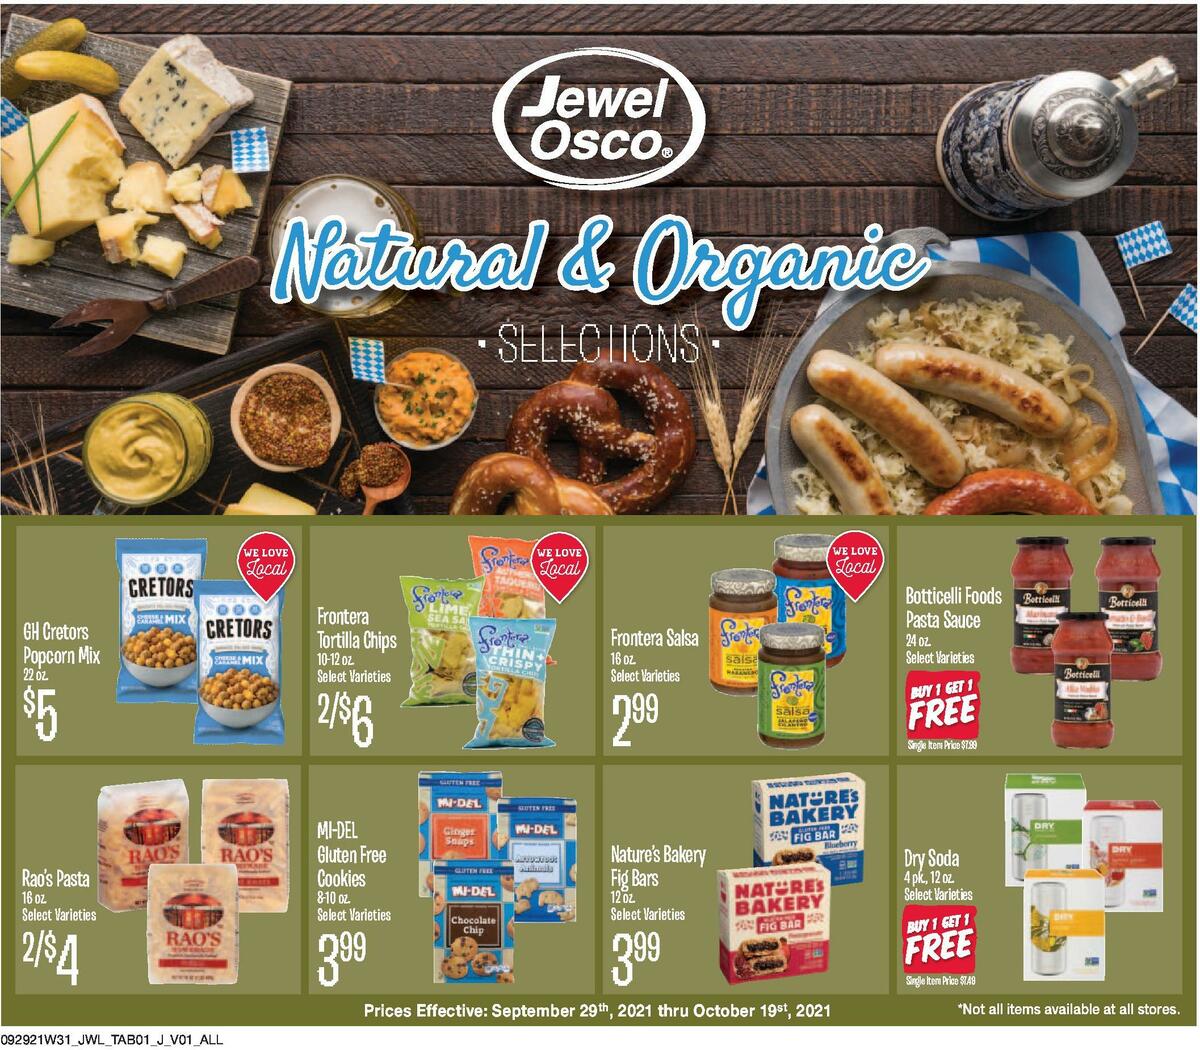 Jewel Osco Natural & Organic Weekly Ad from September 29